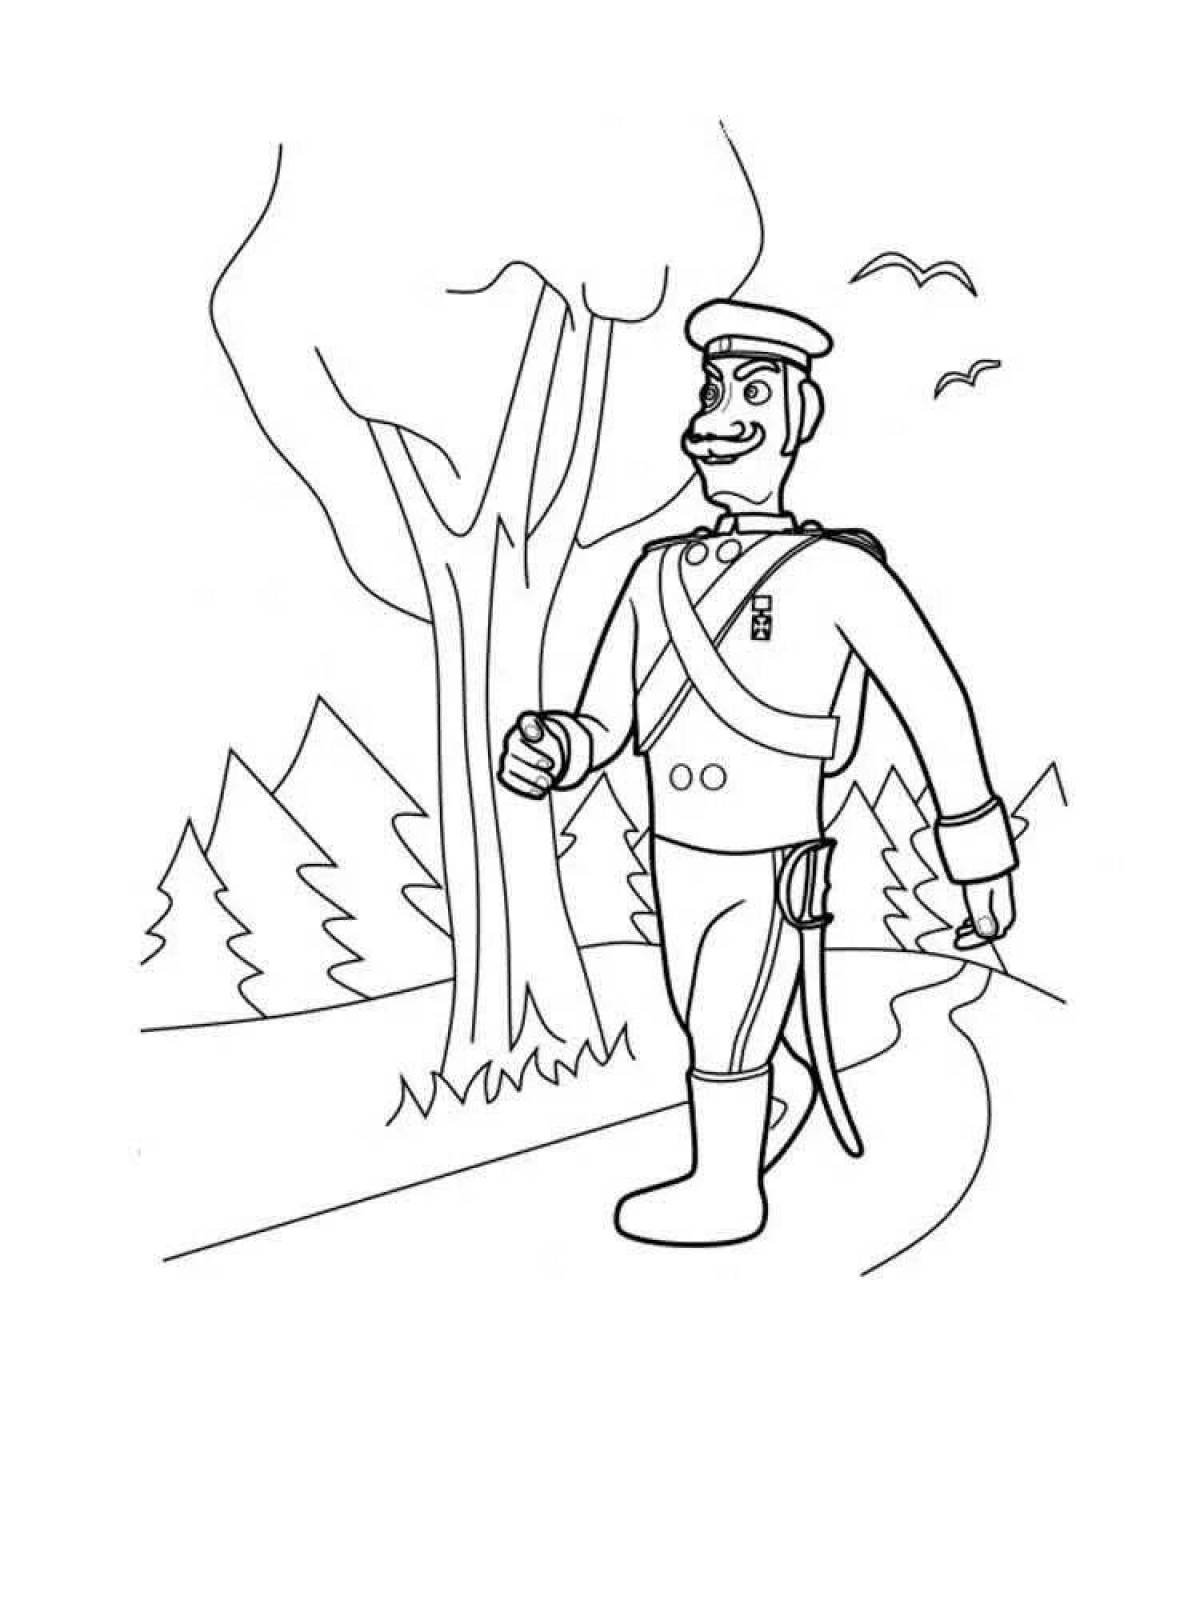 Flint's colorful coloring page